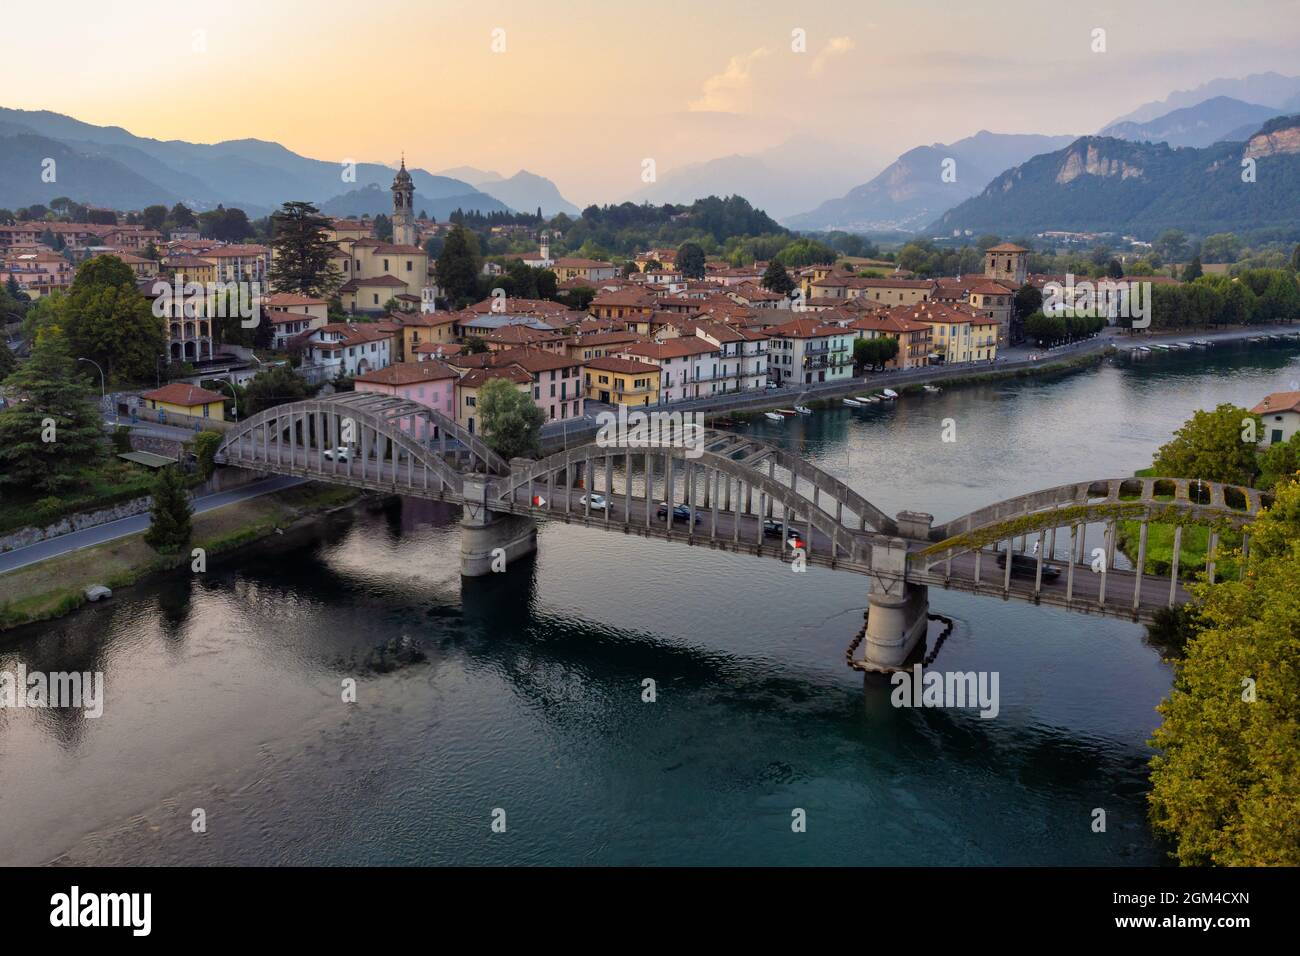 Drone panoramic view Over Bridge And River Towards a characteristic Italian  village, Brivio, Lombardy, Italy Stock Photo - Alamy